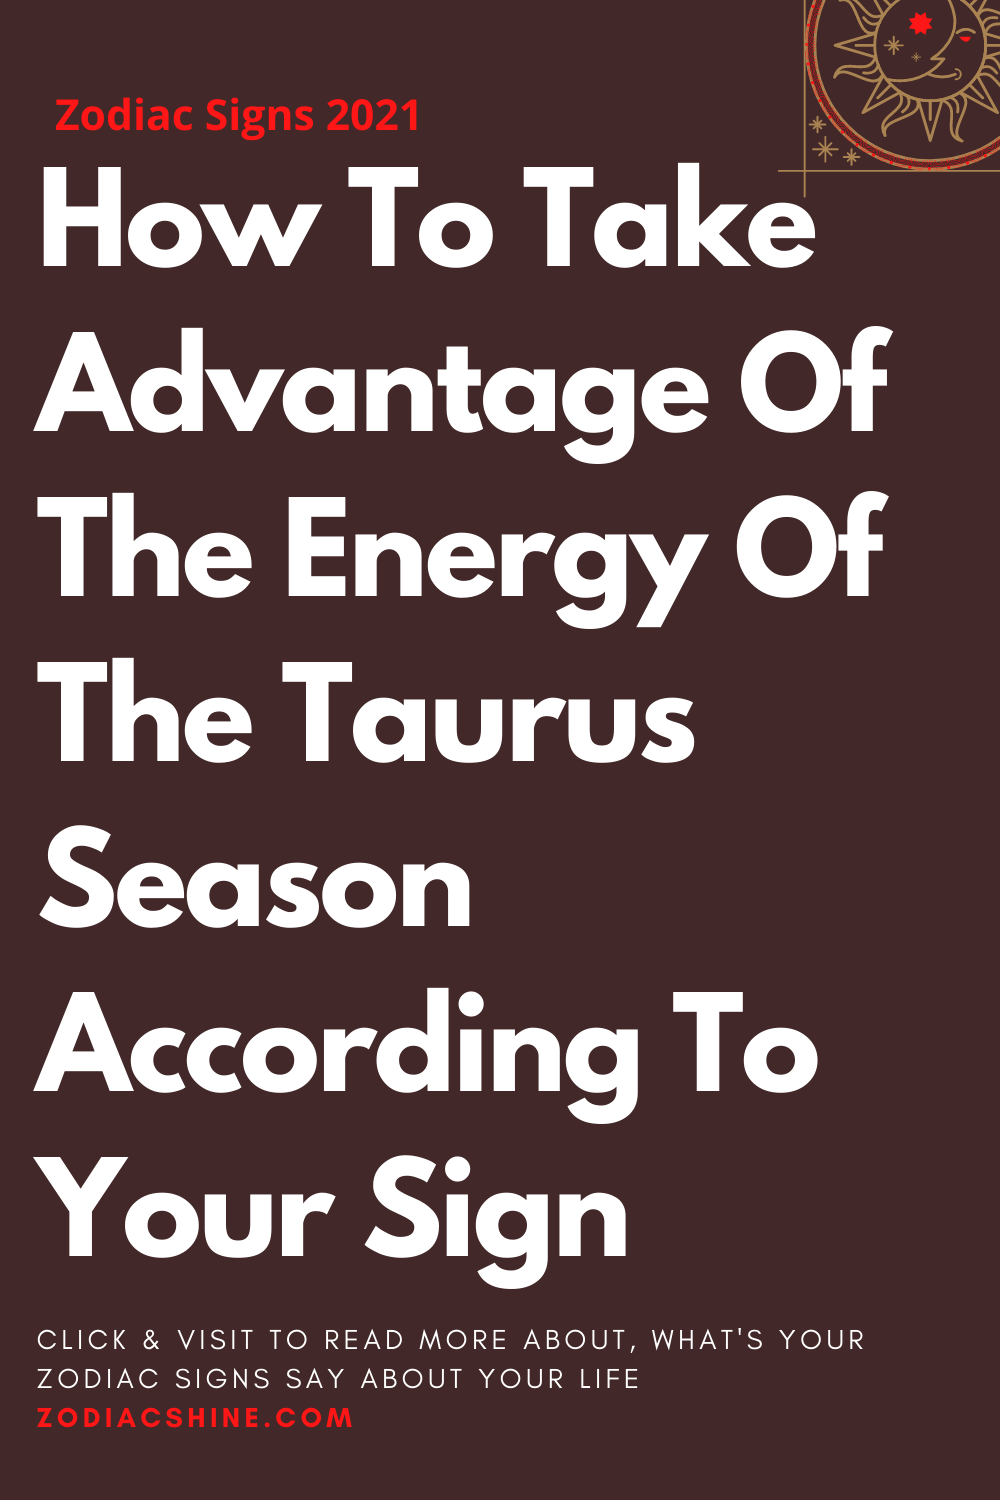 How To Take Advantage Of The Energy Of The Taurus Season According To Your Sign